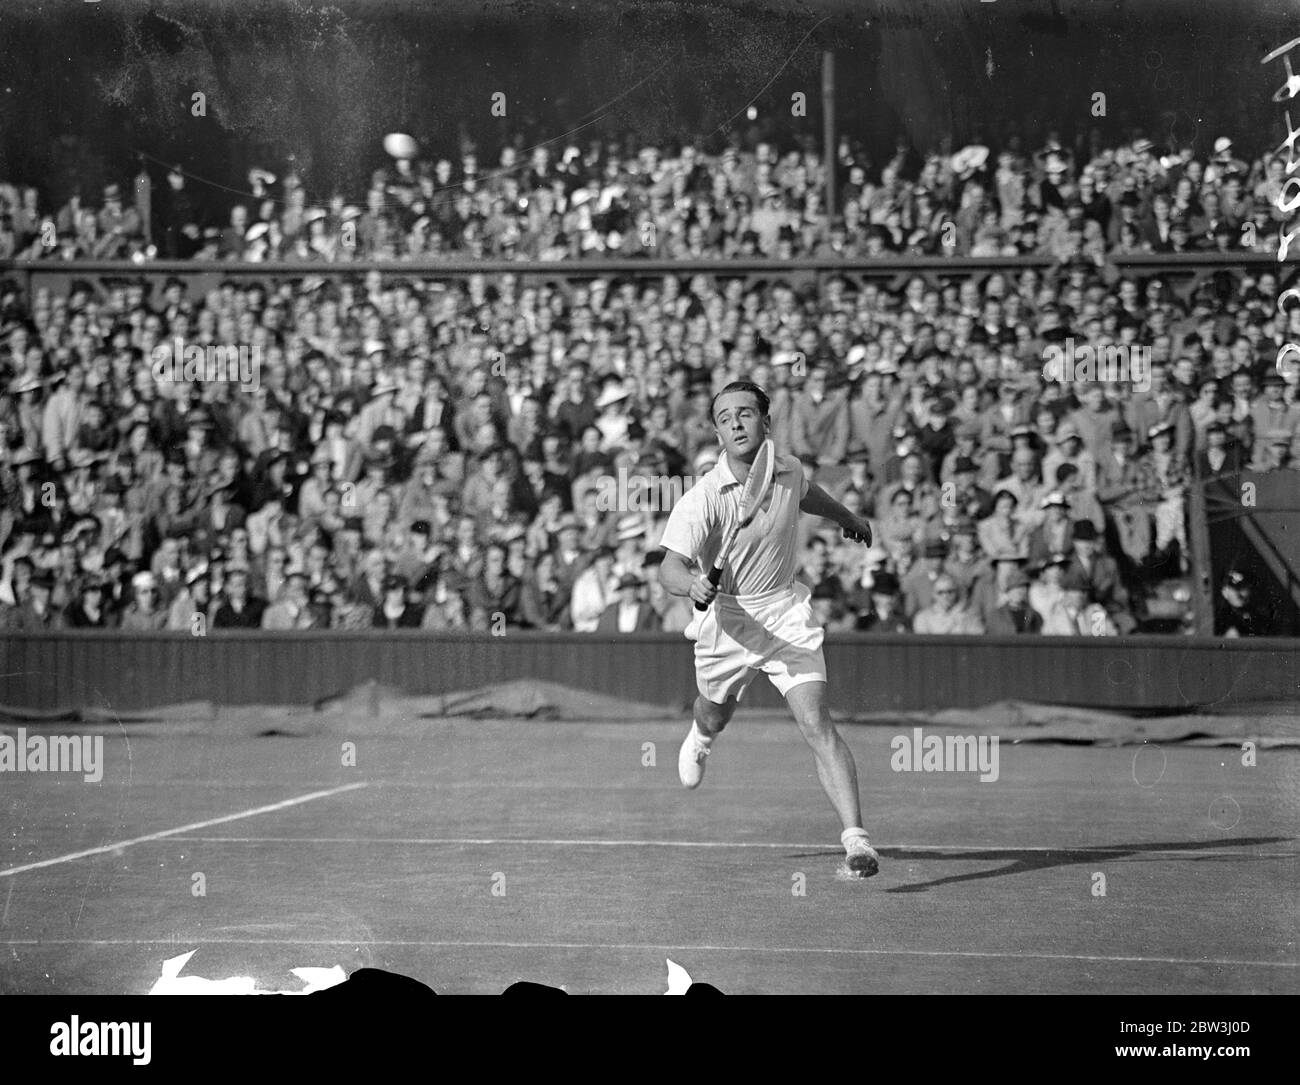 Fred Perry scores second win for England in Davis Cup . Defeats Adrian Quist . Following Austin ' s defeat of Crawford Fred Perry beat A K Quist of Australia 6-1 , 4-6 , 7-5 , 6-2 in the singles of the Davis Cup Challenge Round between England and Australia at Wimbledon . Rain interrupted play many times . Photo shows , Adrian Quist in play against Fred Perry on the Centre Court . 25 July 1936 Stock Photo